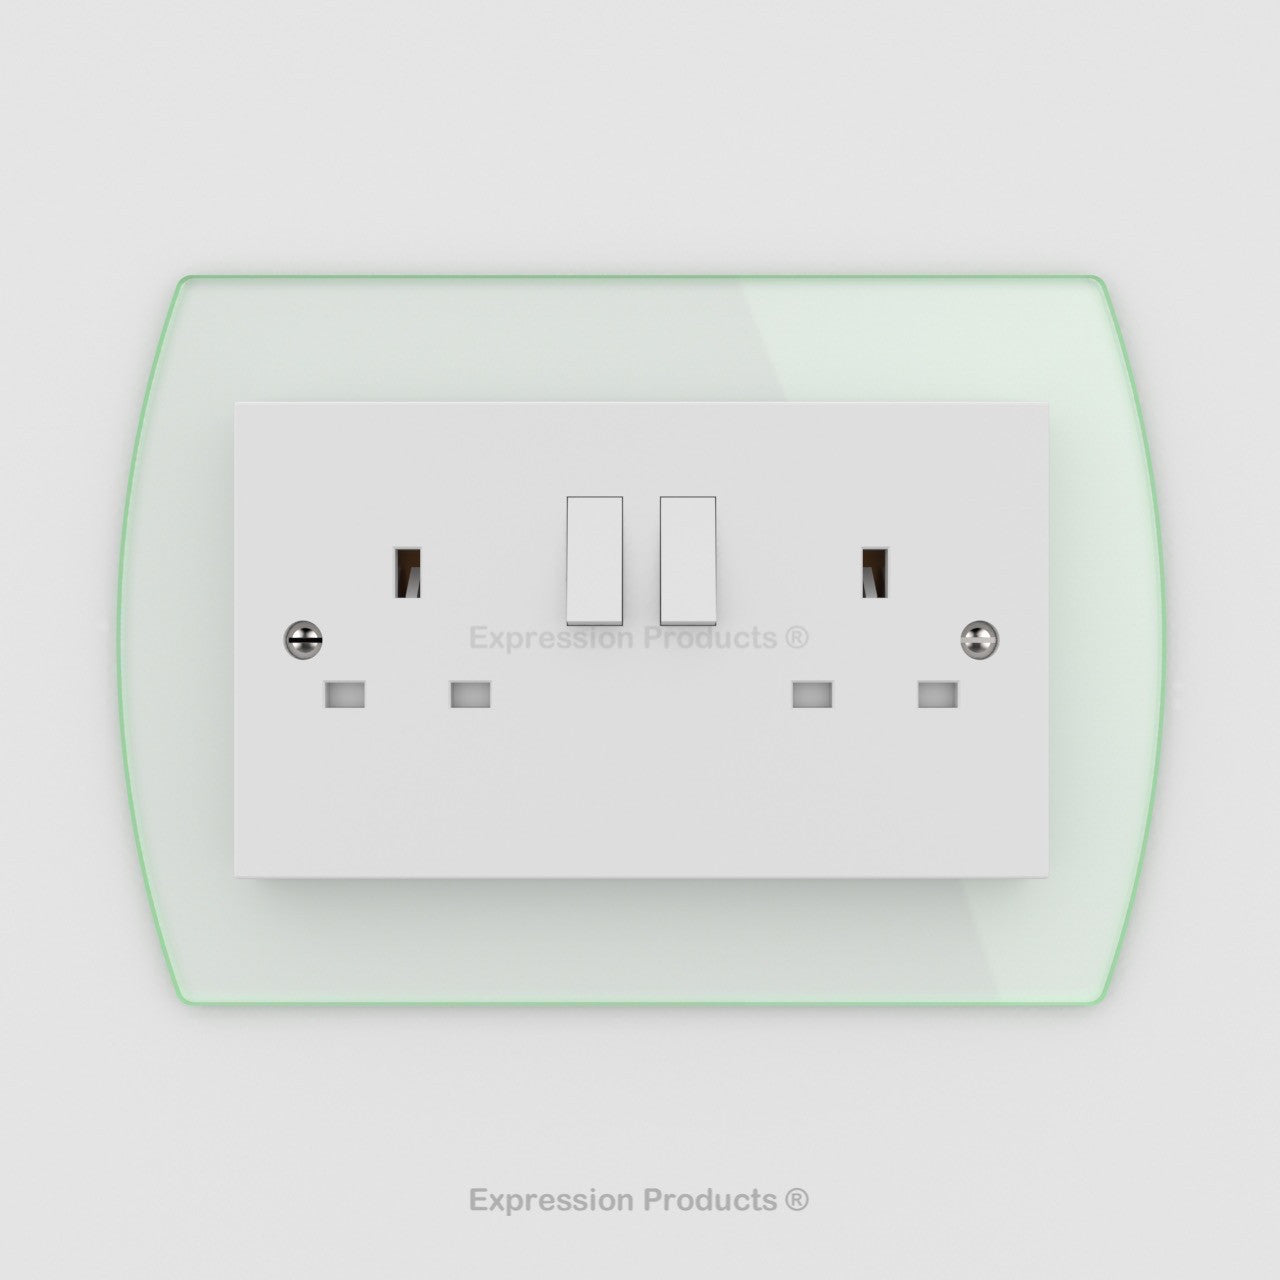 Switch or Socket Surround Plate - Style 004 - Expression Products Ltd